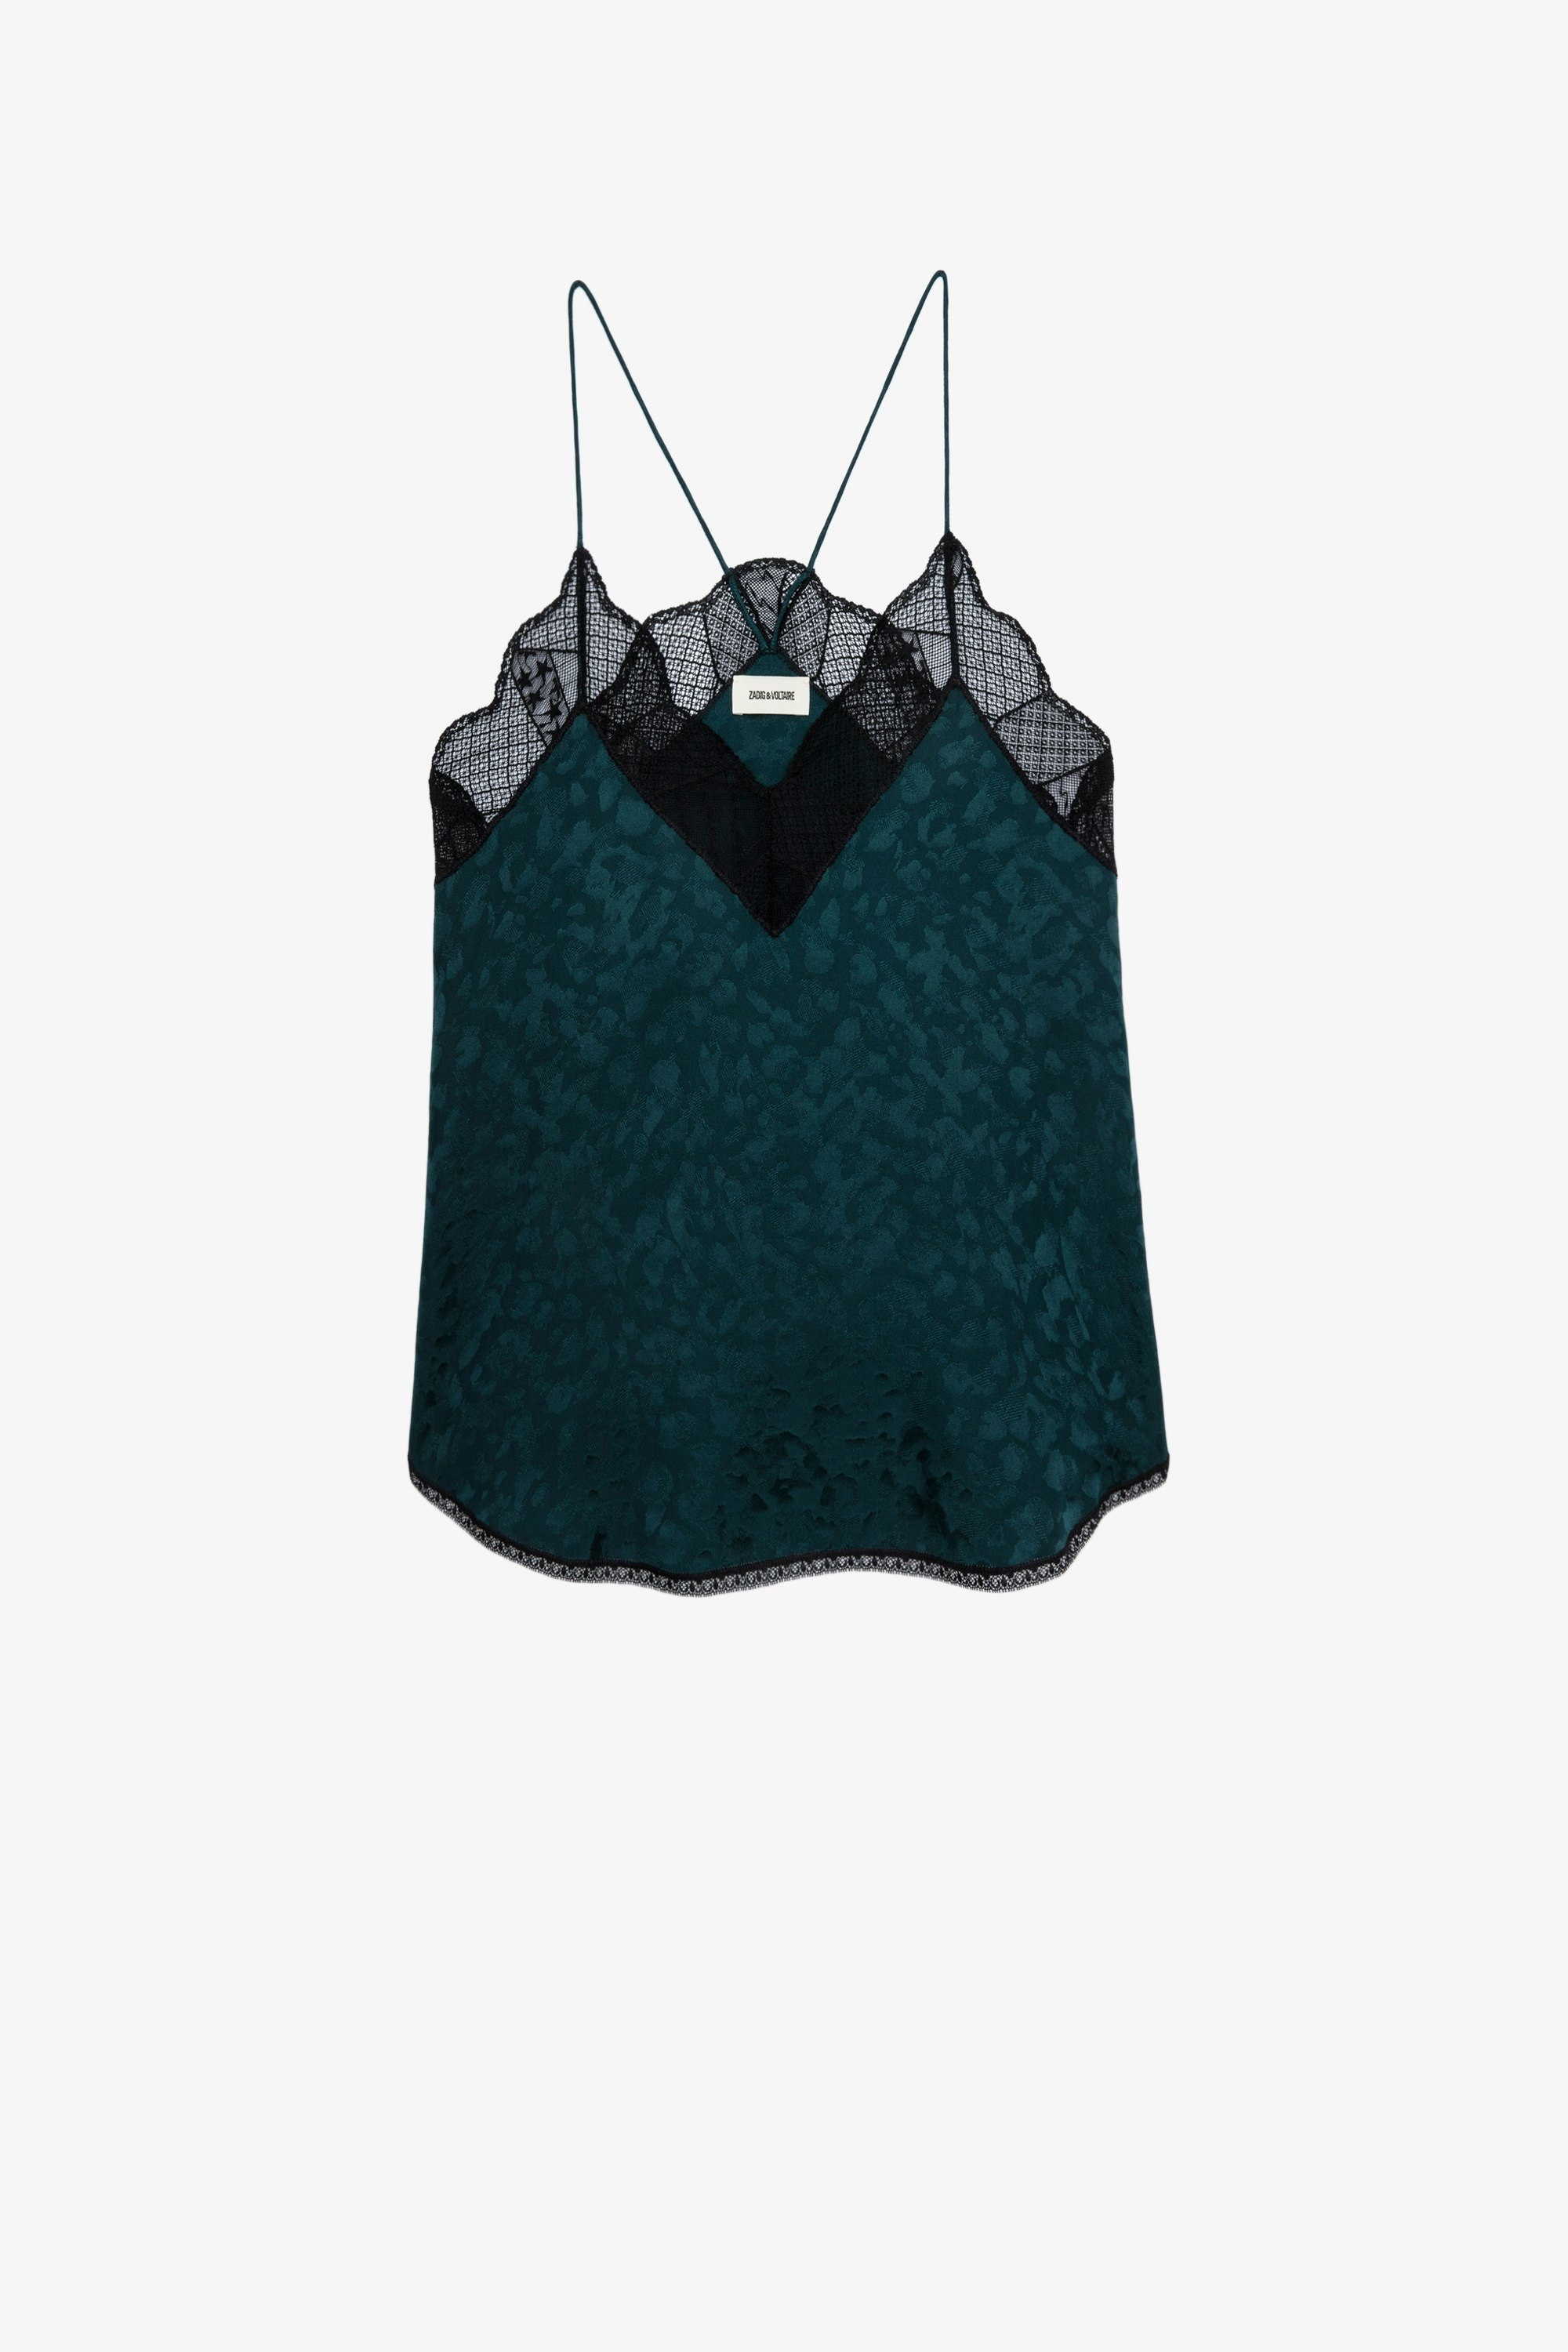 Christy Jac Leo Silk Camisole Green silk camisole with leopard-print jacquard and lace trim